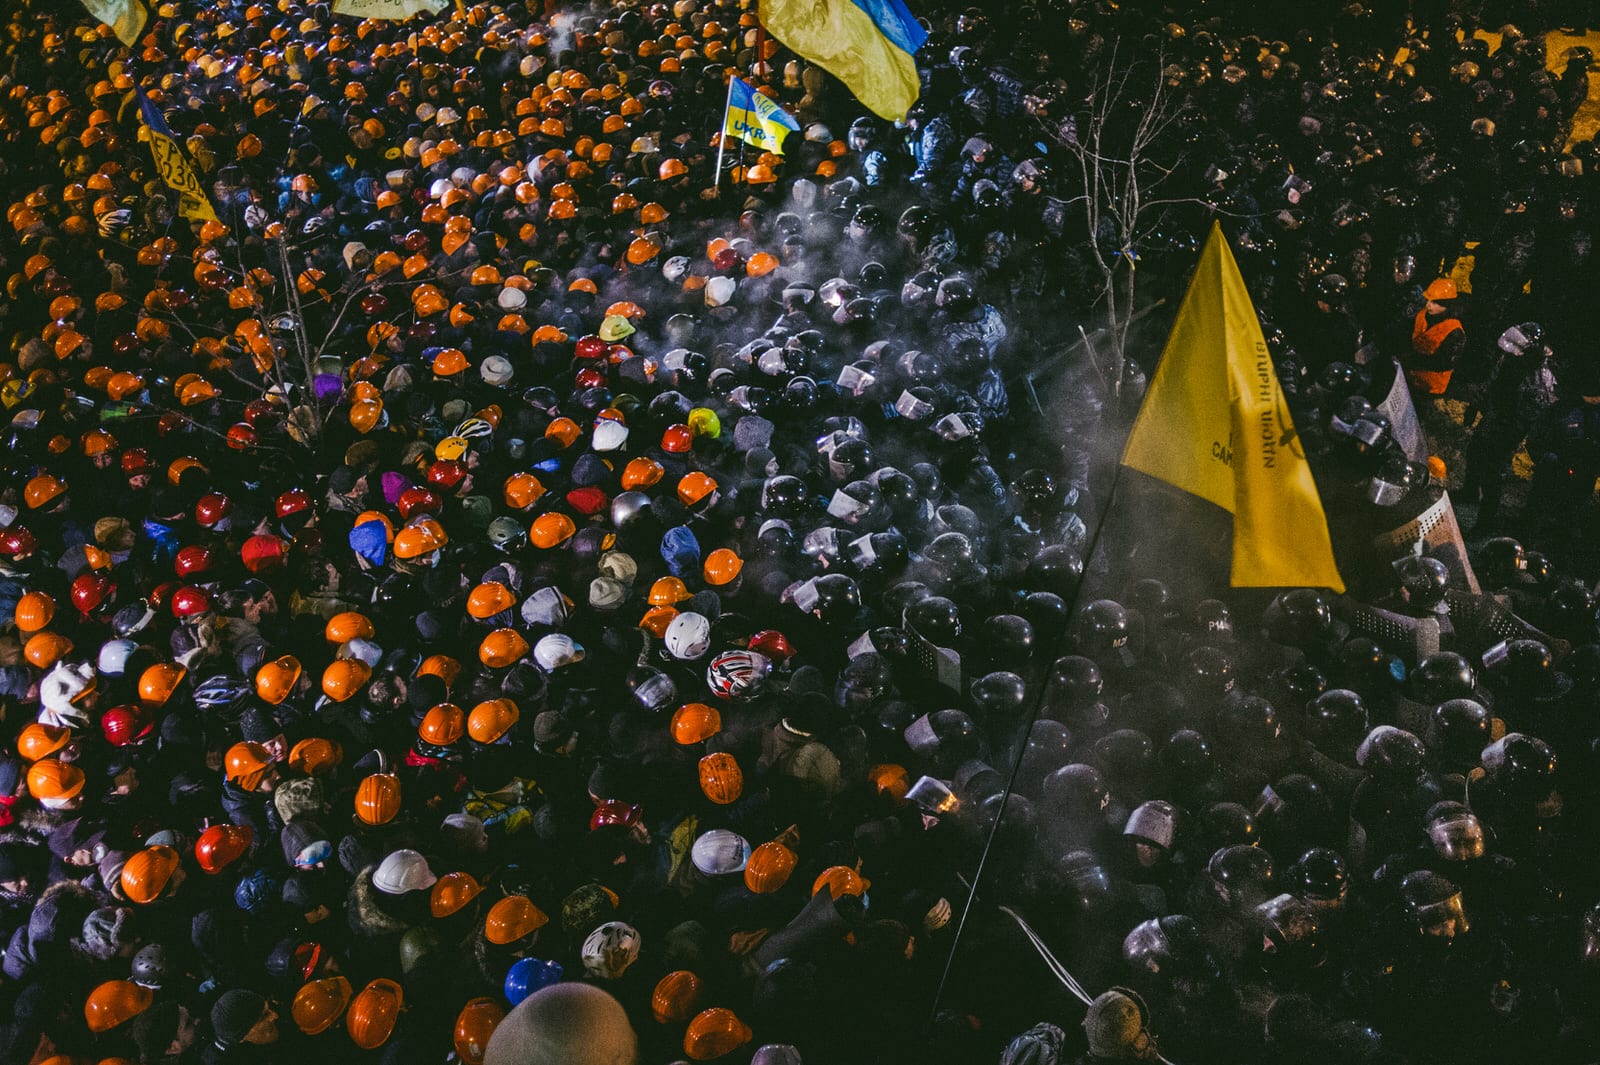 Peaceful opposition between protesters and riot police lasted all night. Hard power wasn’t applied by any of the parties. Kiev, Dec. 11, 2014.